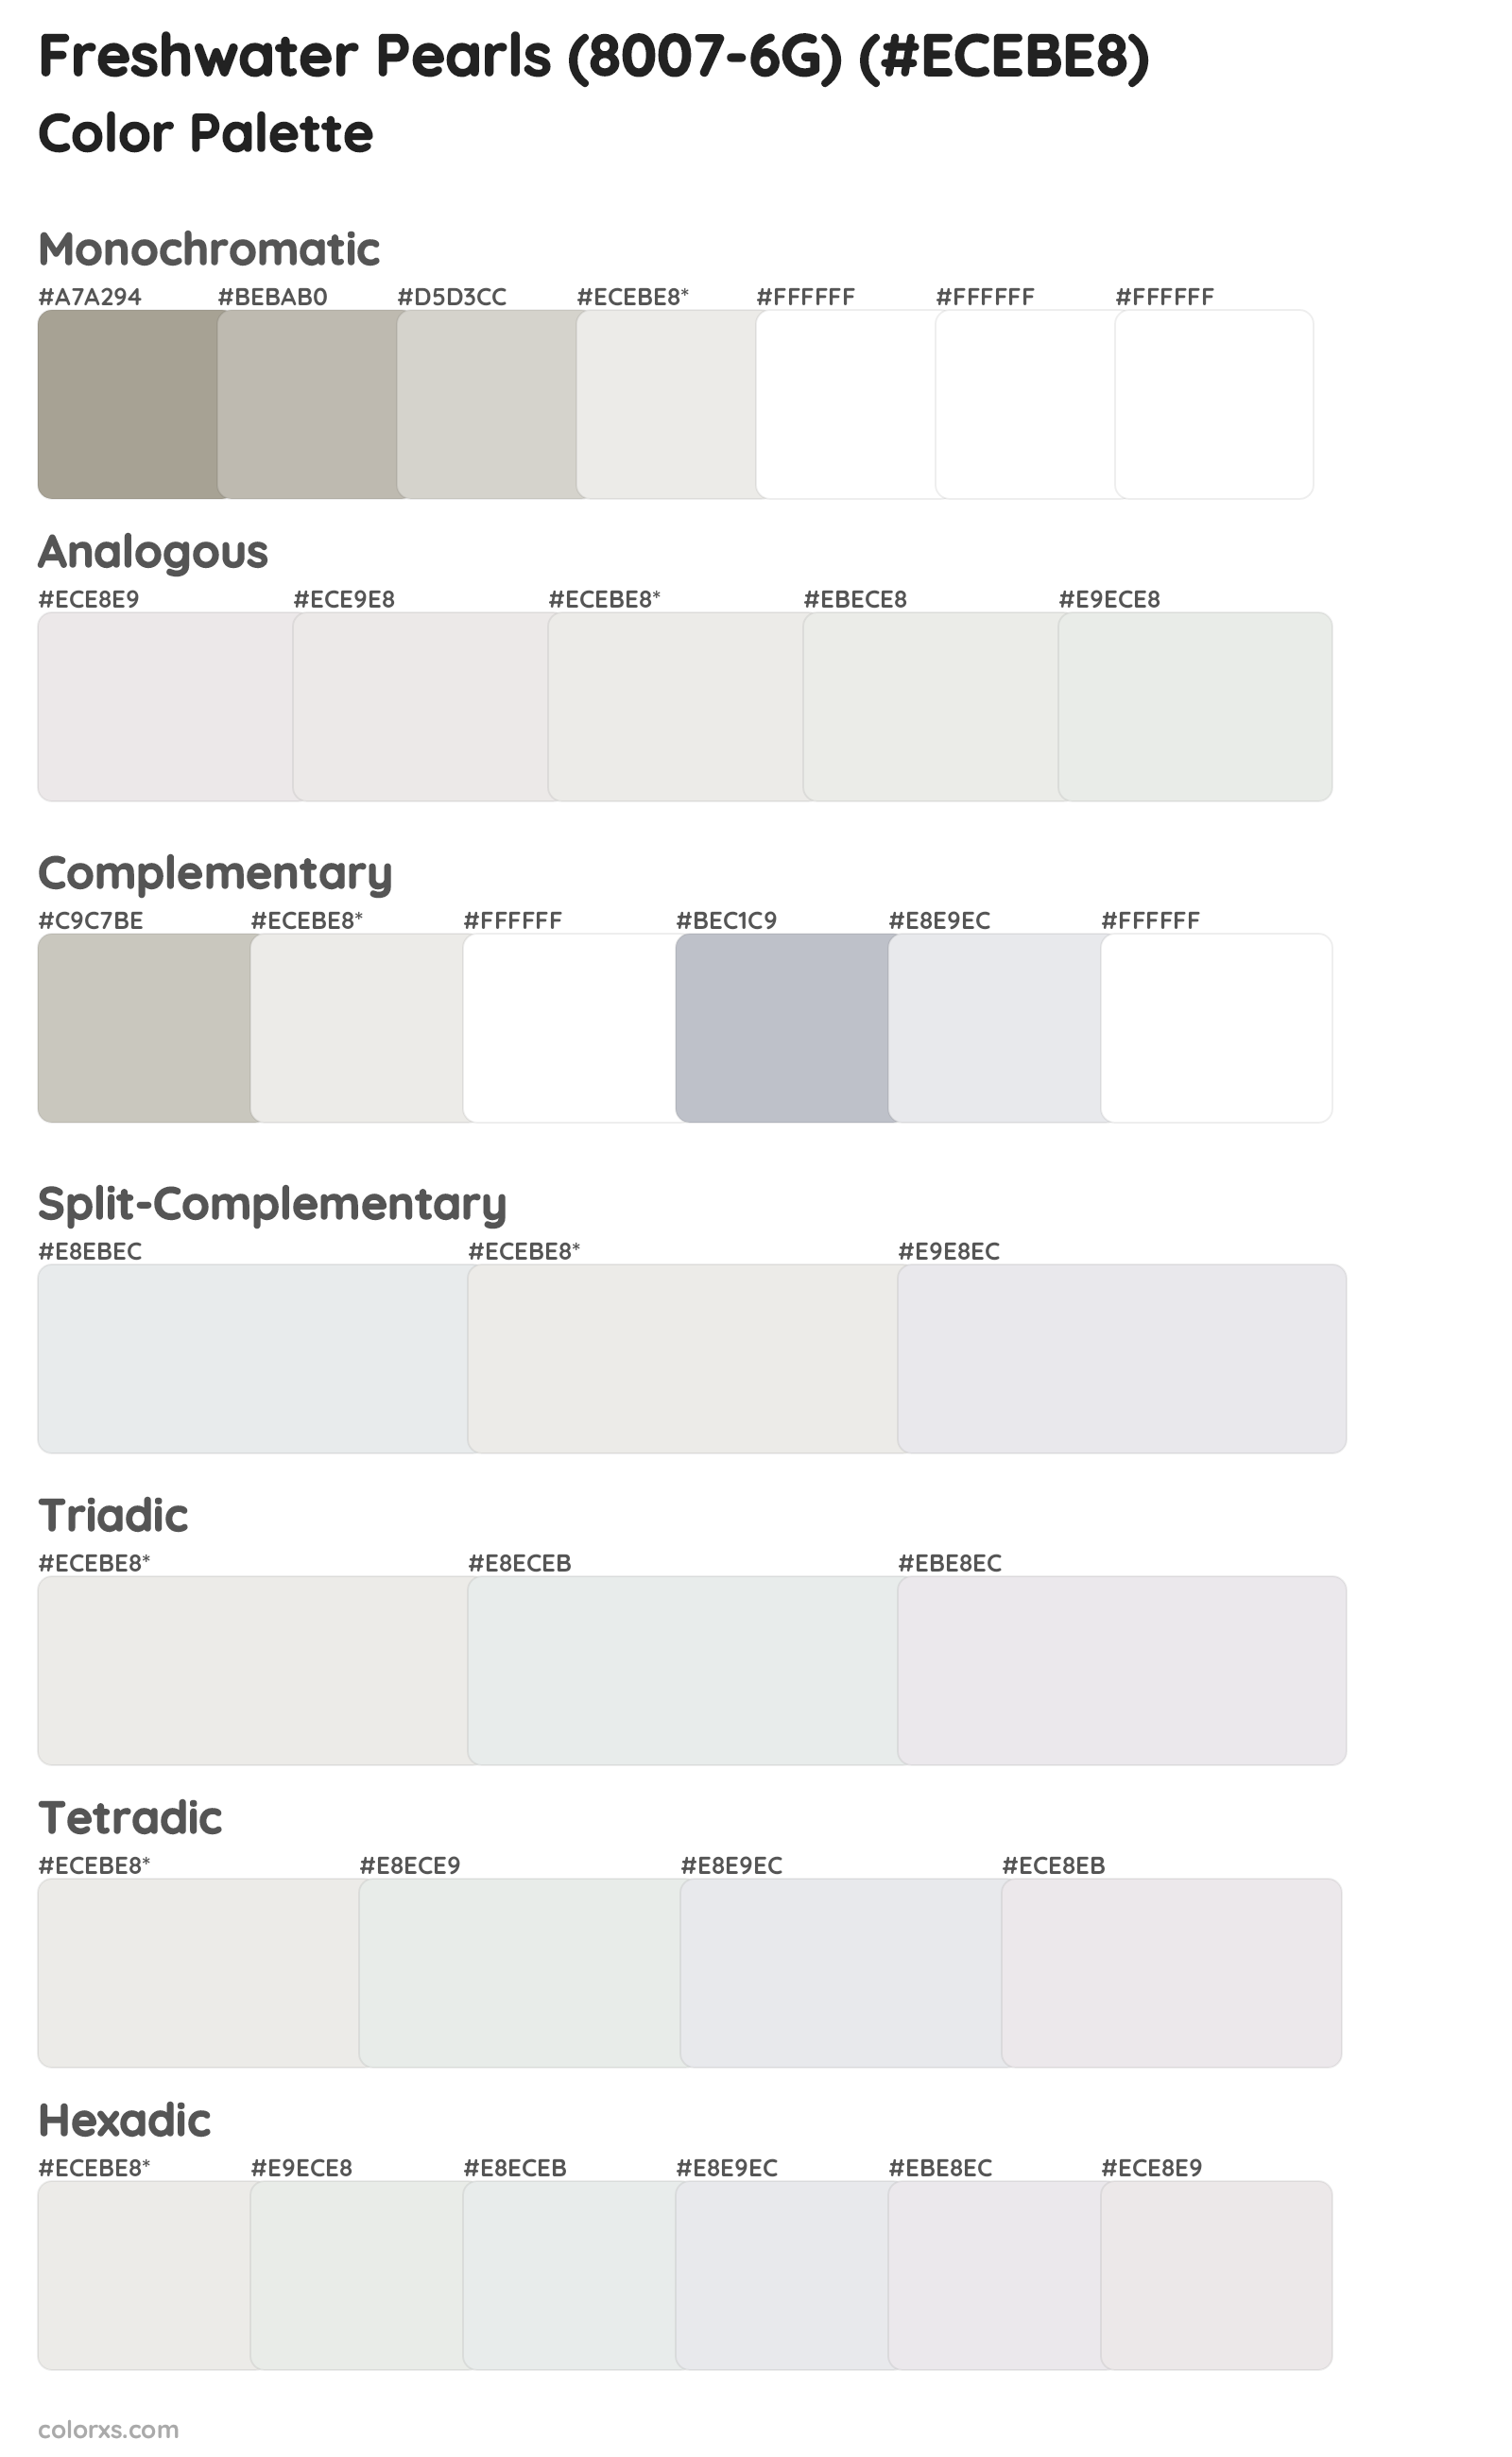 Freshwater Pearls (8007-6G) Color Scheme Palettes